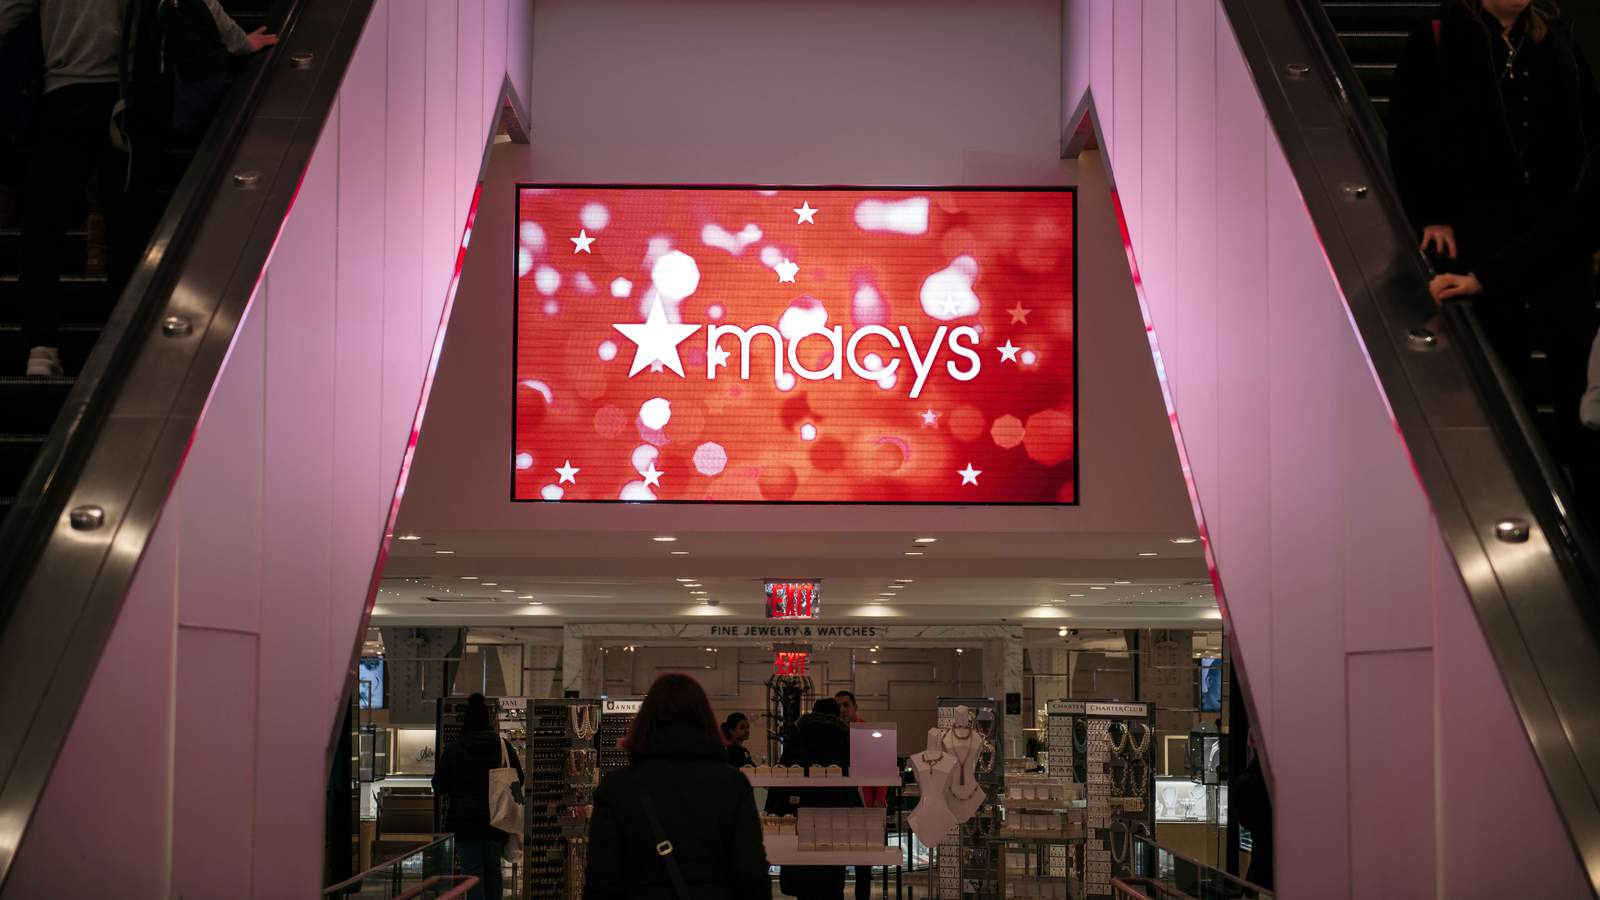 Macy’s closings all stores until March 31 in response to the coronavirus